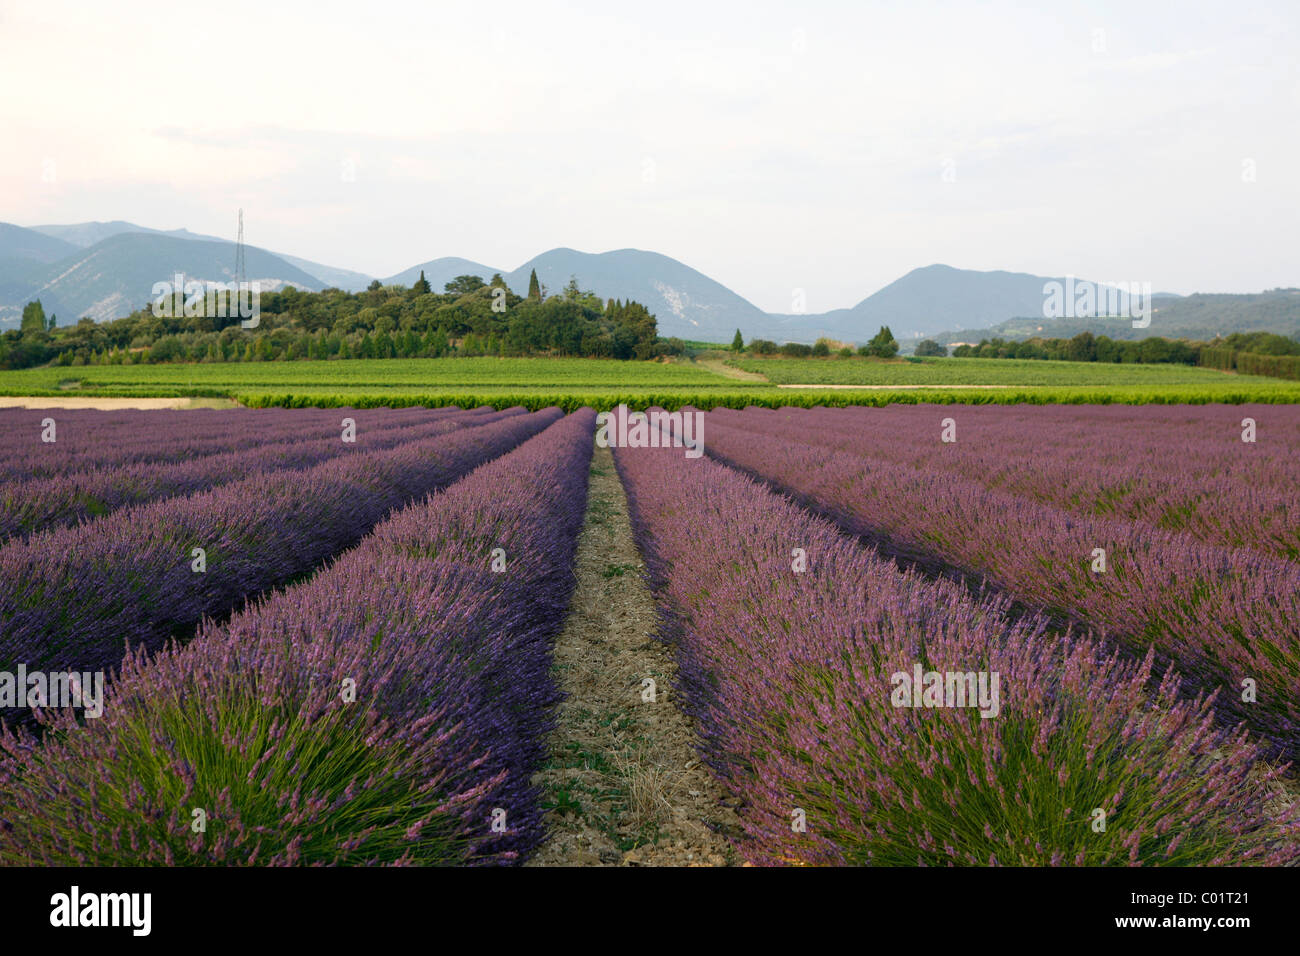 Lavender cultivation, lavender field at Le Pegu, Valreas, Vaucluse, Provence, southern France, France, Europe Stock Photo